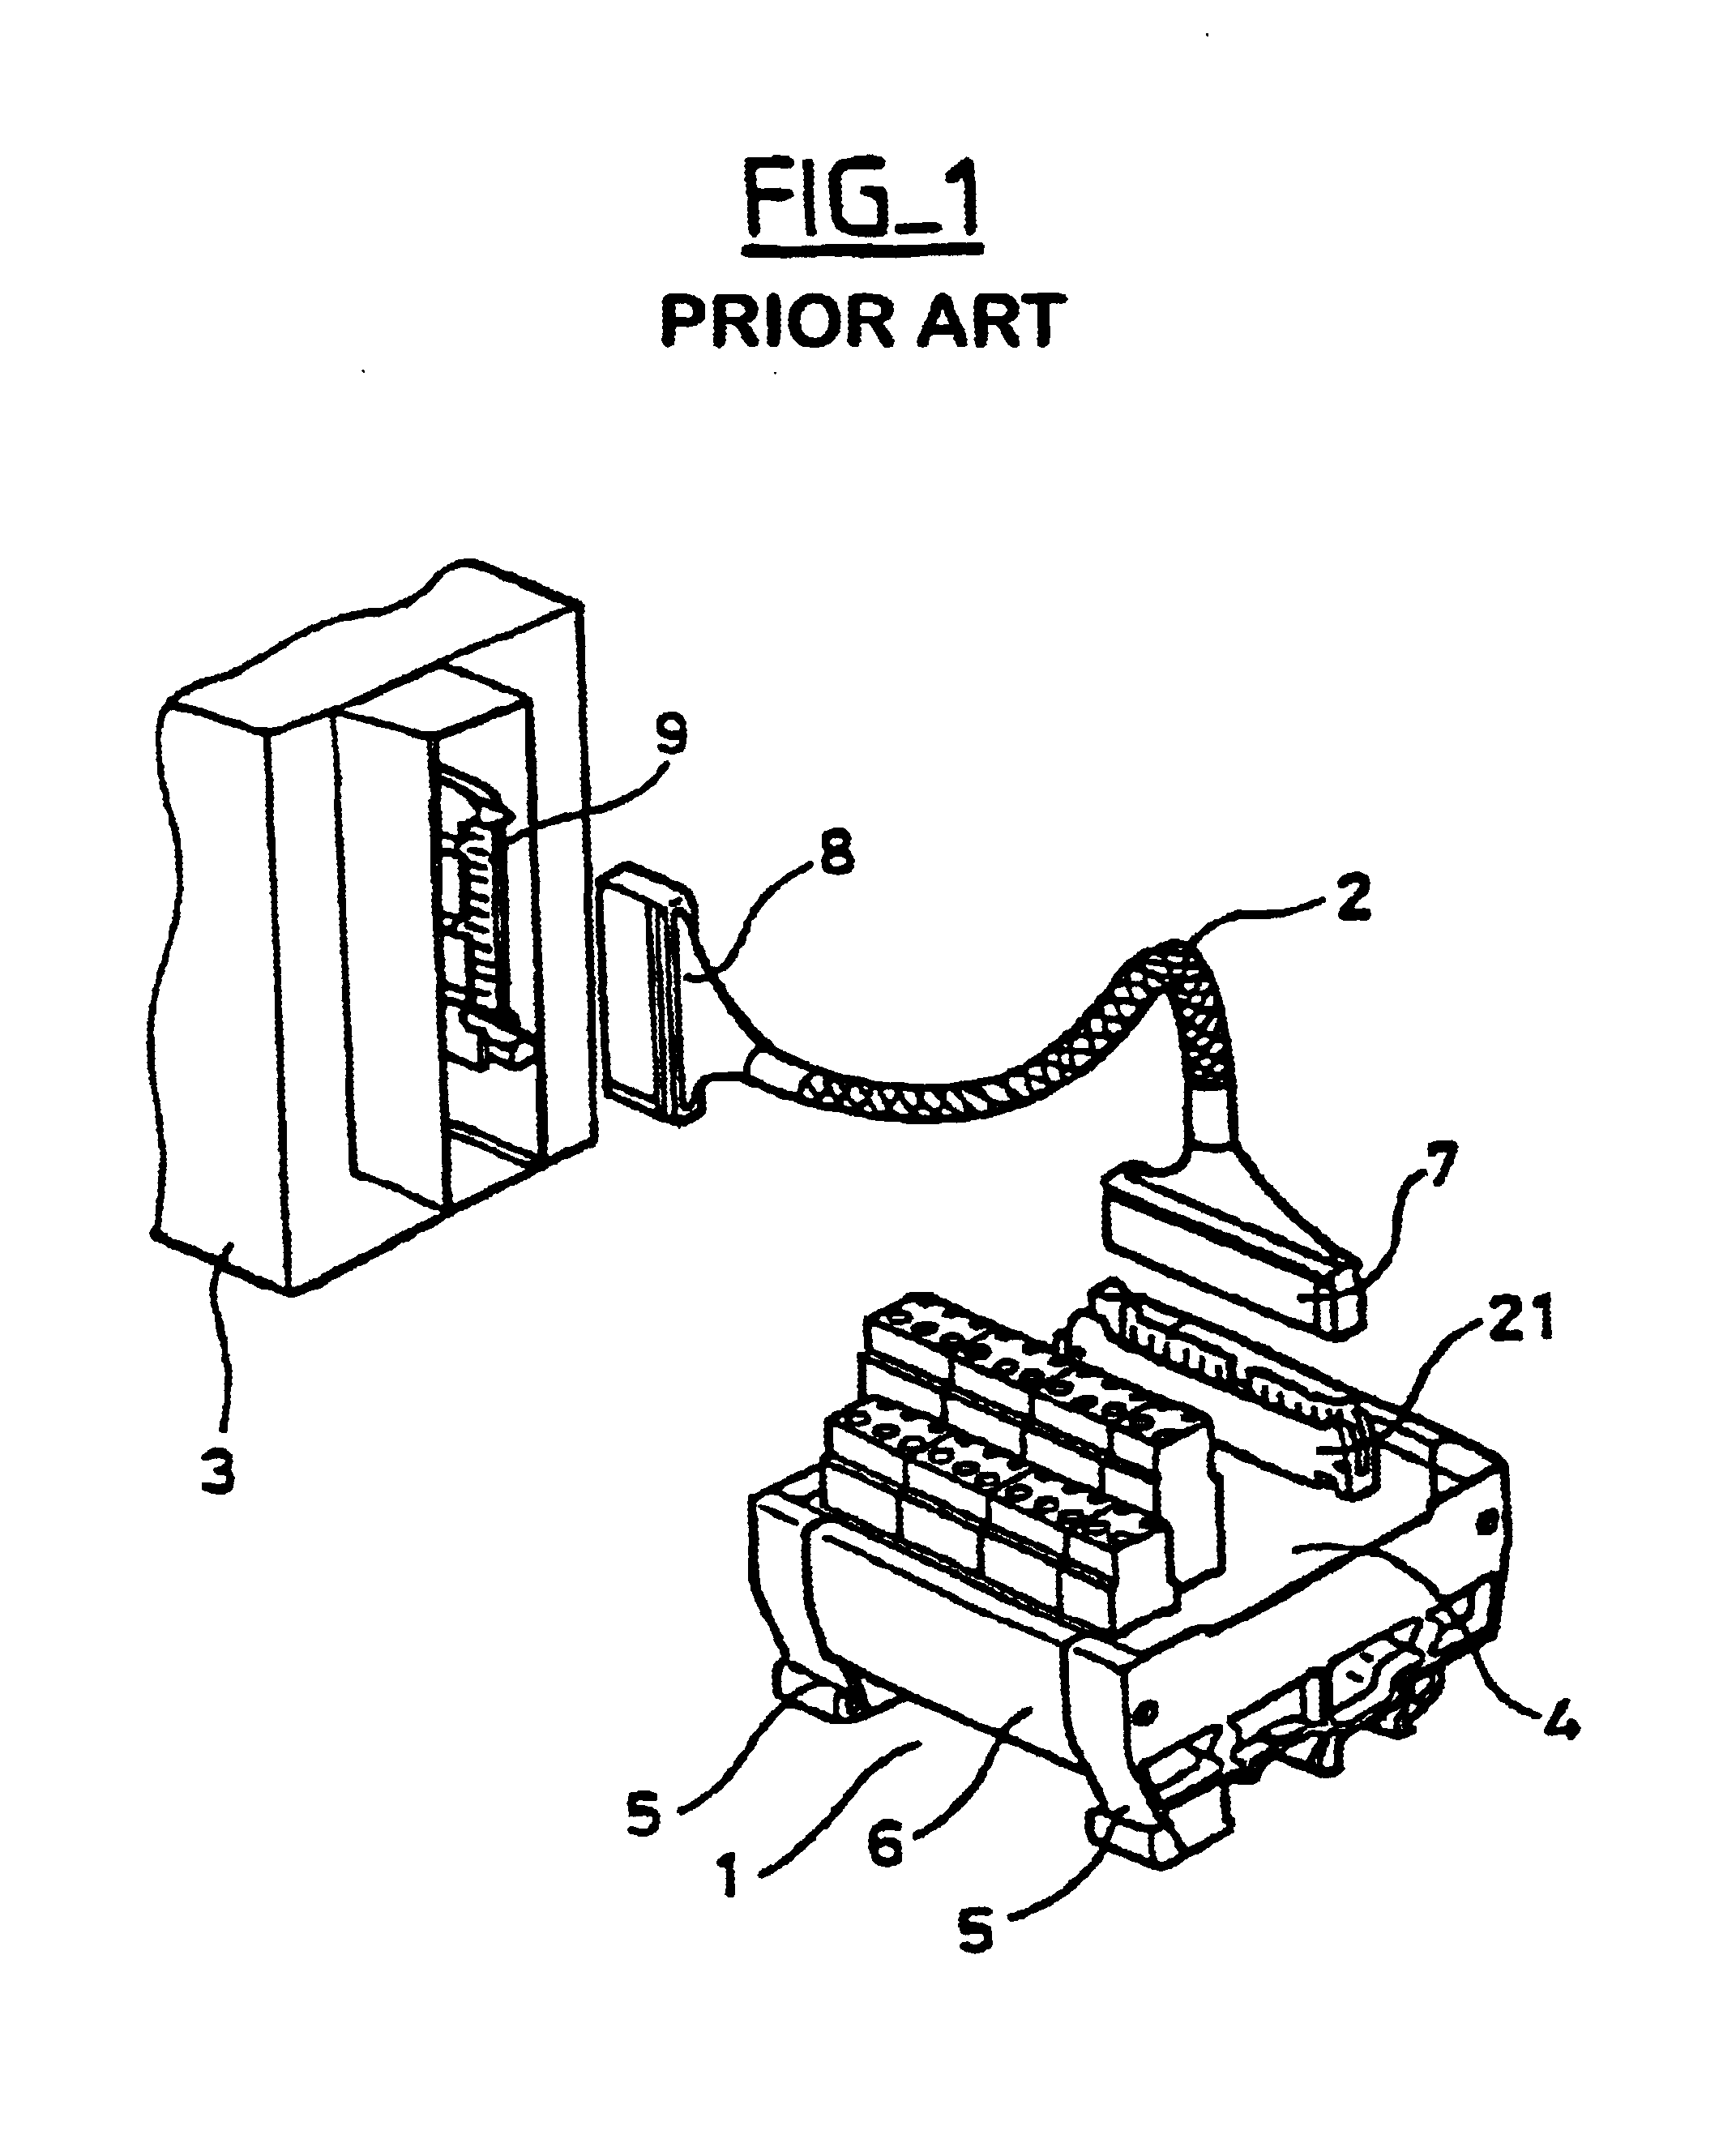 Interface device between pieces of equipment of a plant